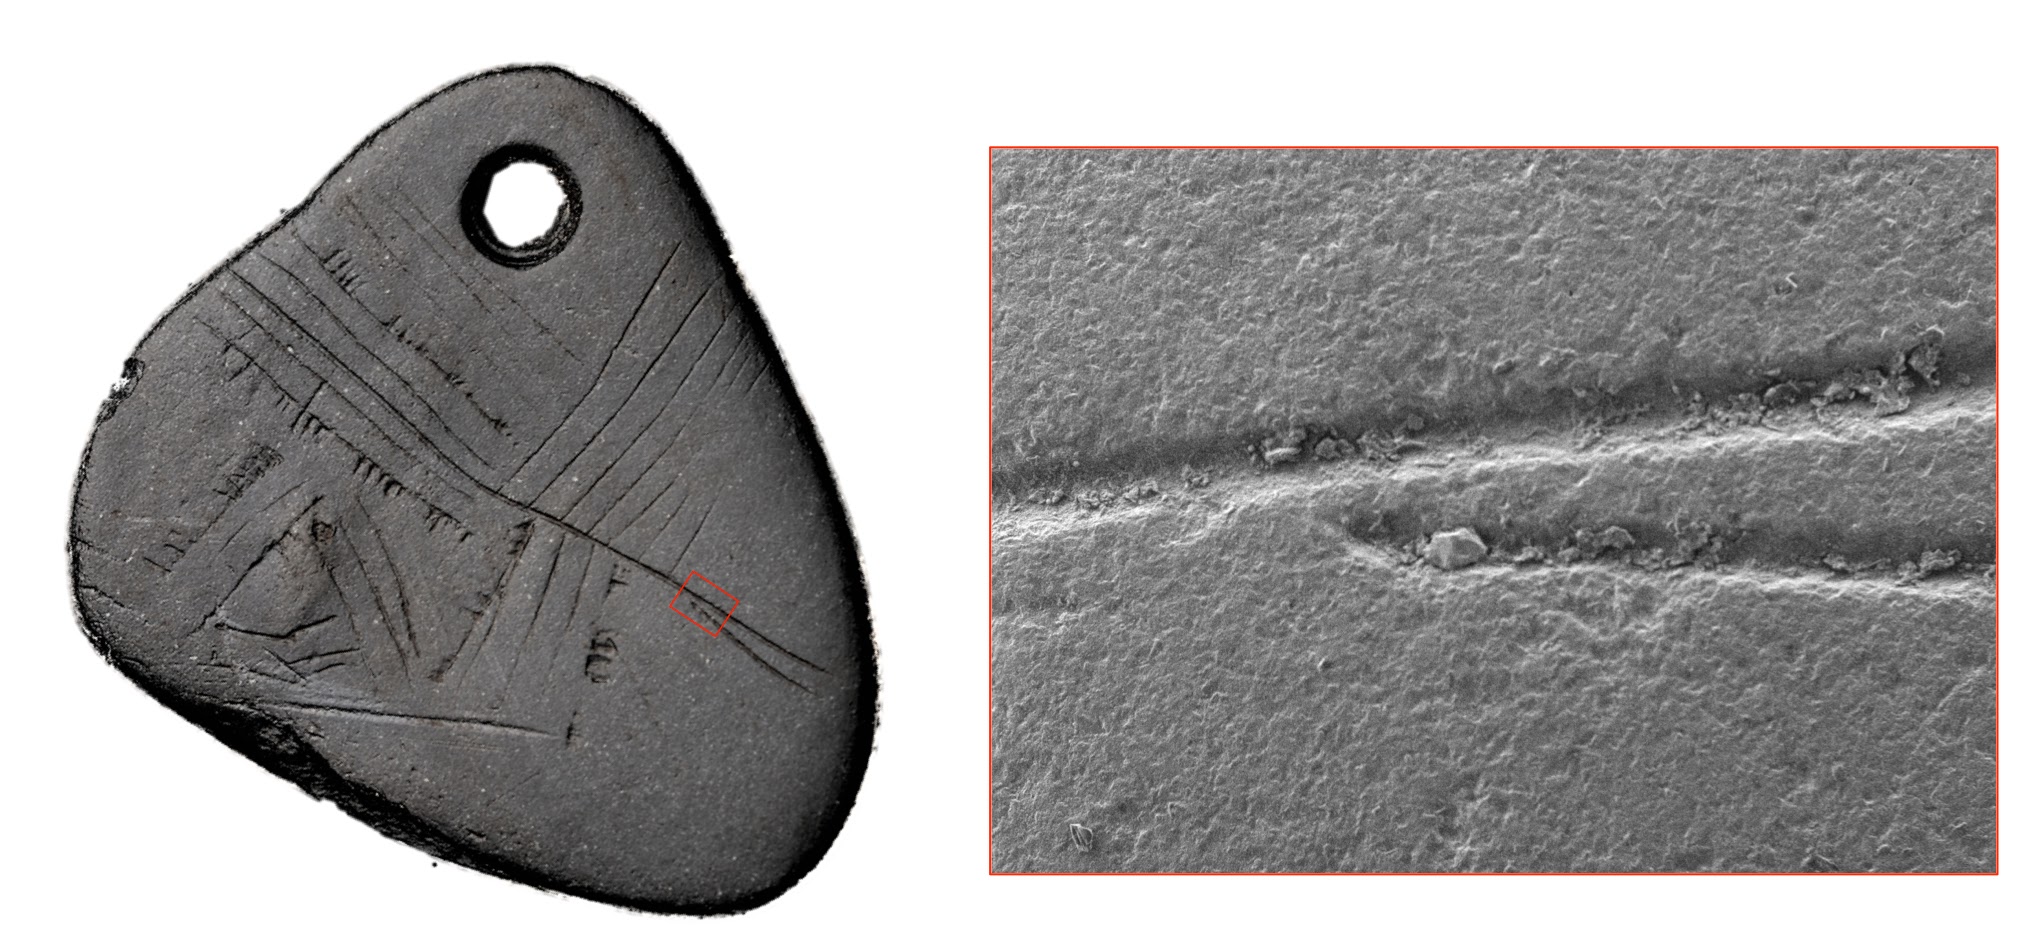 Scanning Electron Microscope image of the Star Carr Pendant